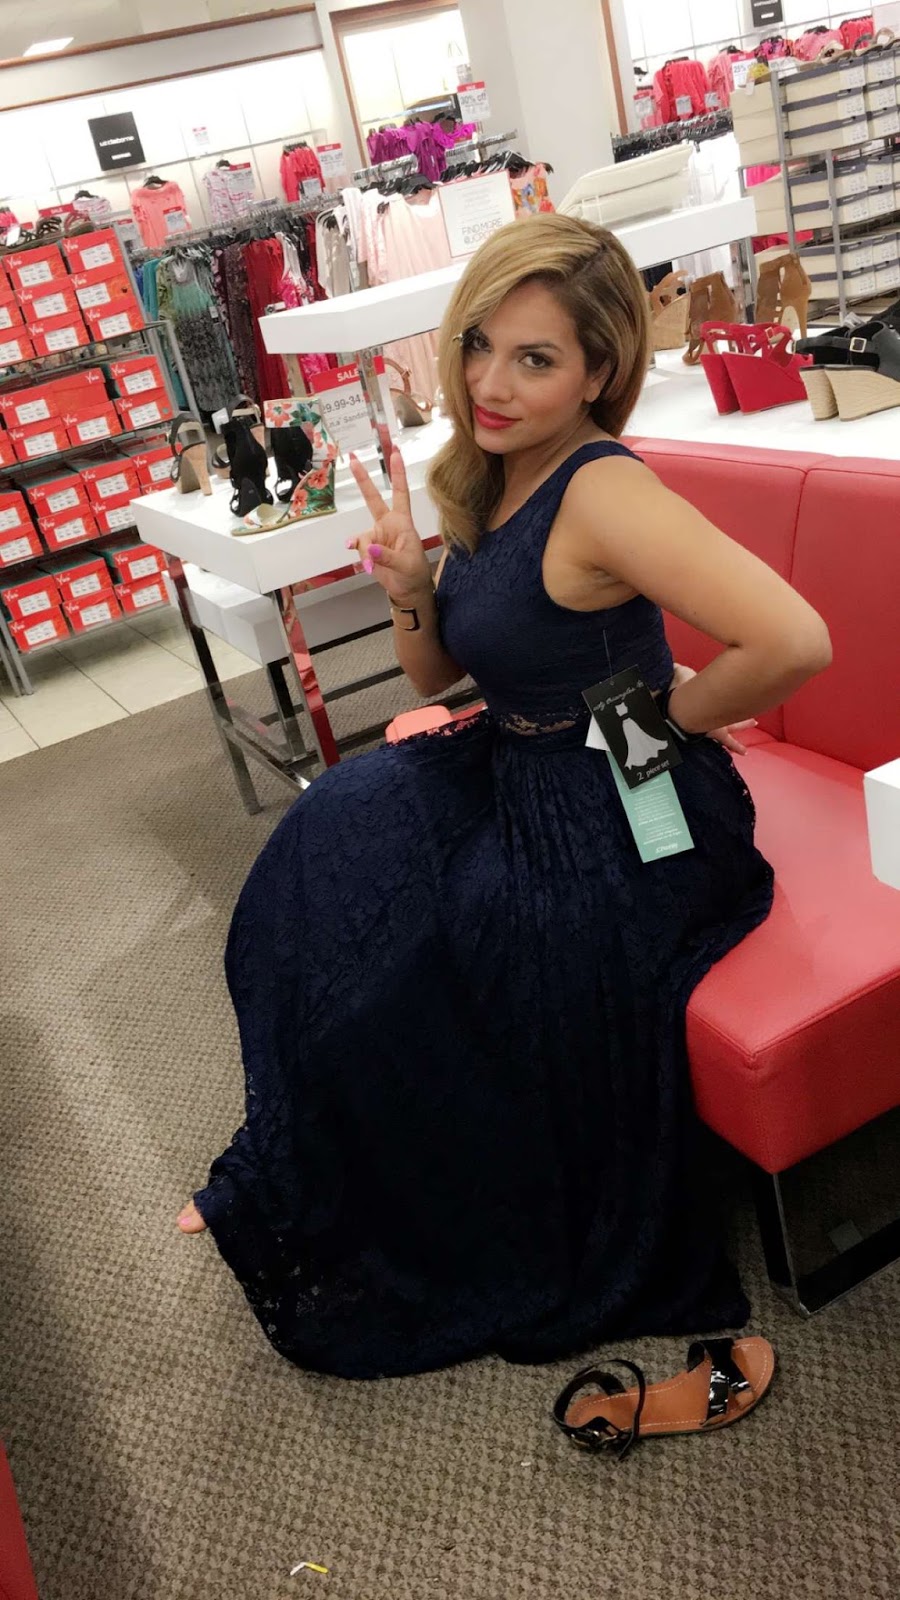 A day with JCPenney in Miami